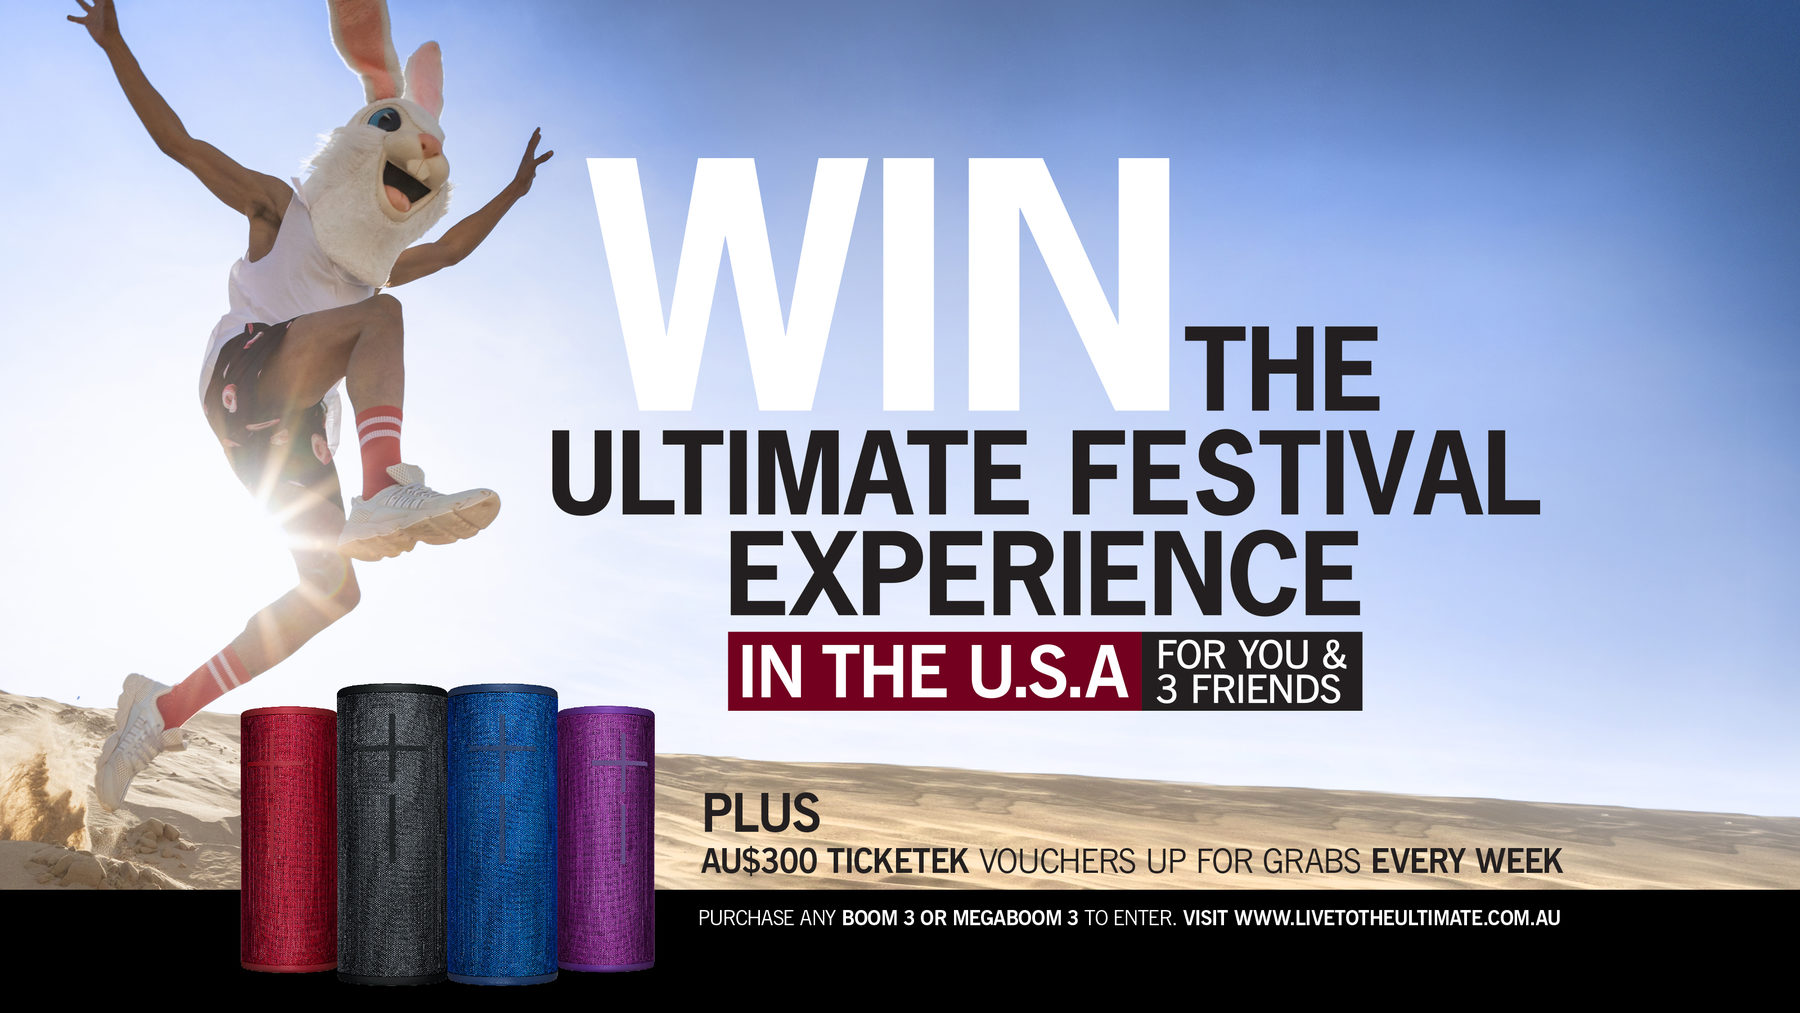 Win the ultimate festival experience in the U.S.A. for you & 3 friends